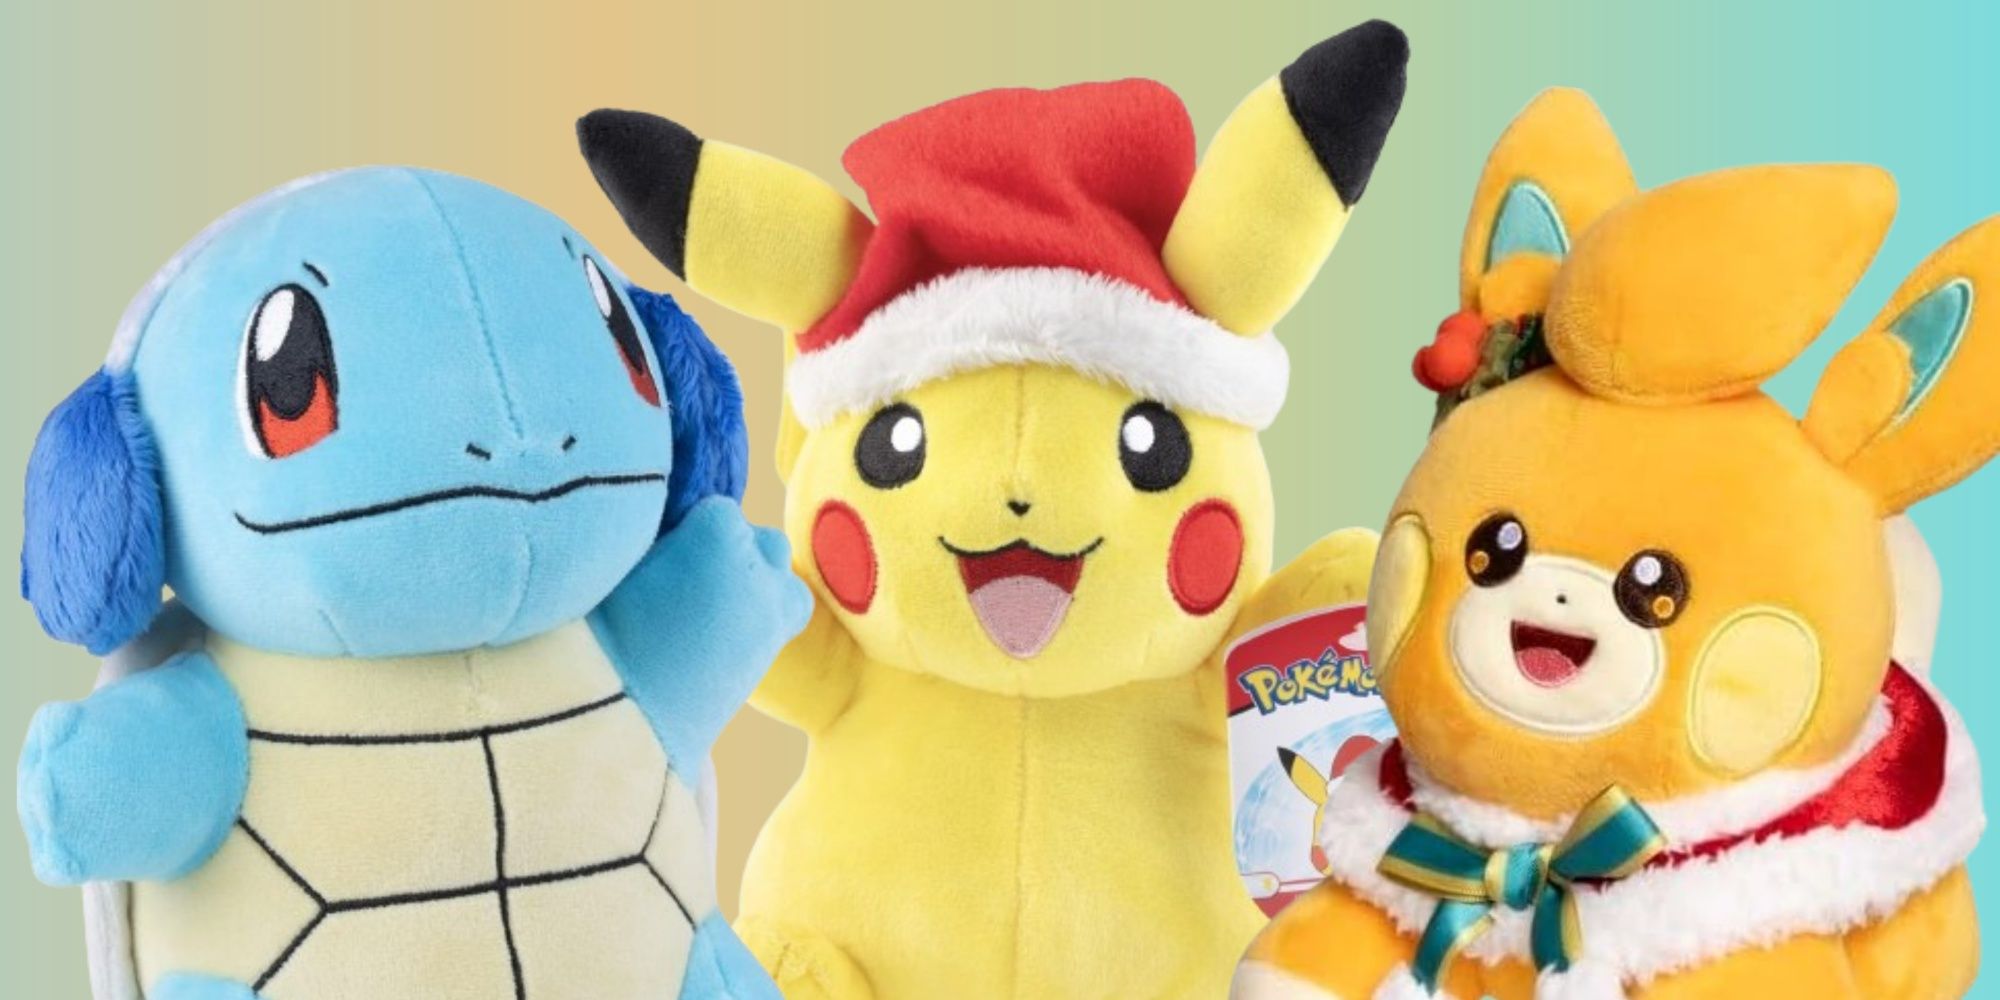 Squirtle, Pikachu, and Pawmi holiday plushes on a gradient background